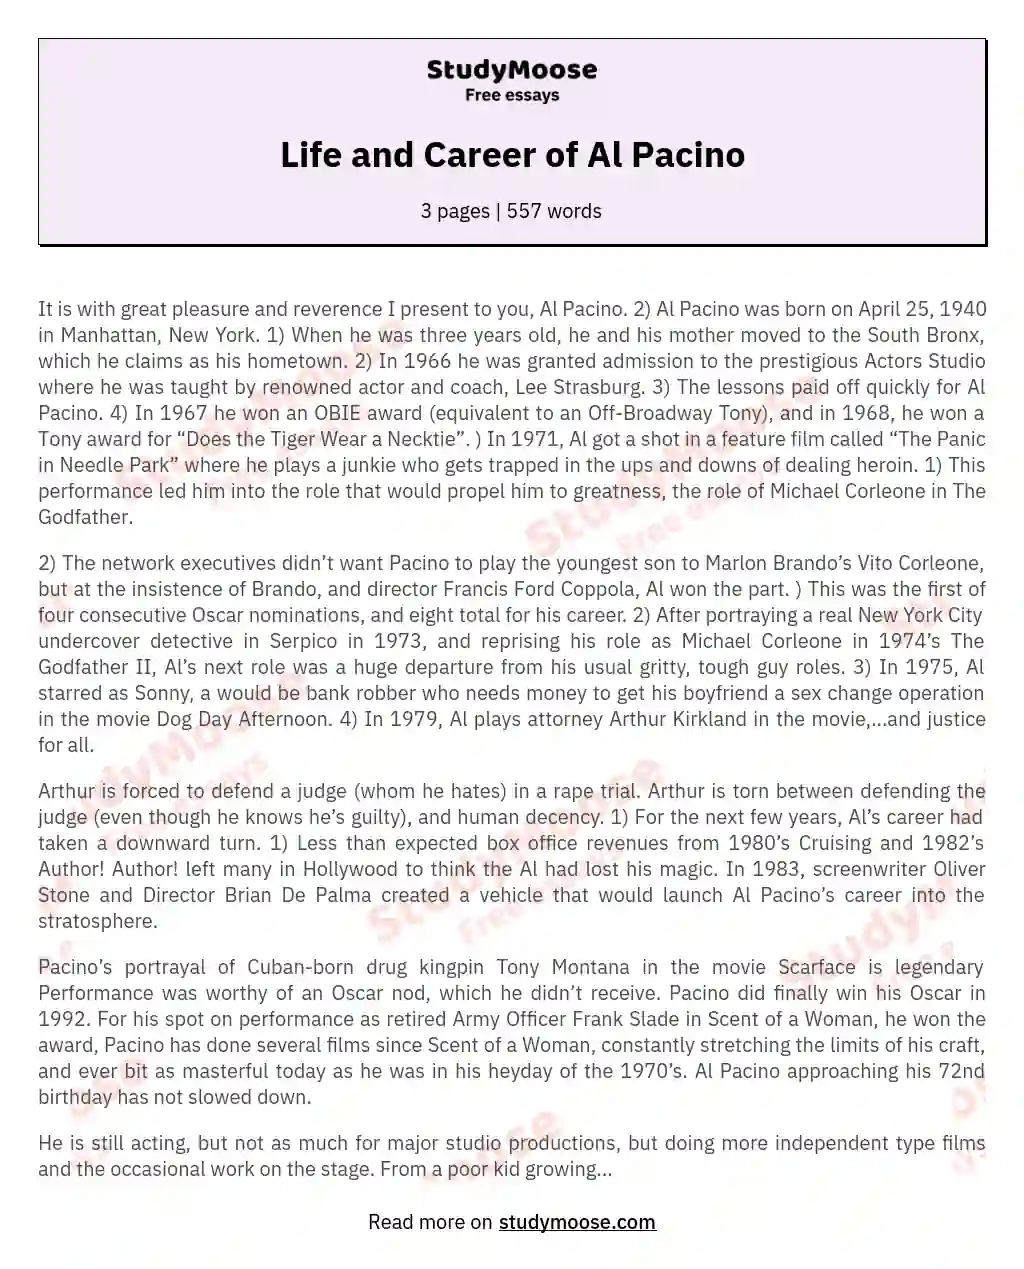 Life and Career of Al Pacino essay